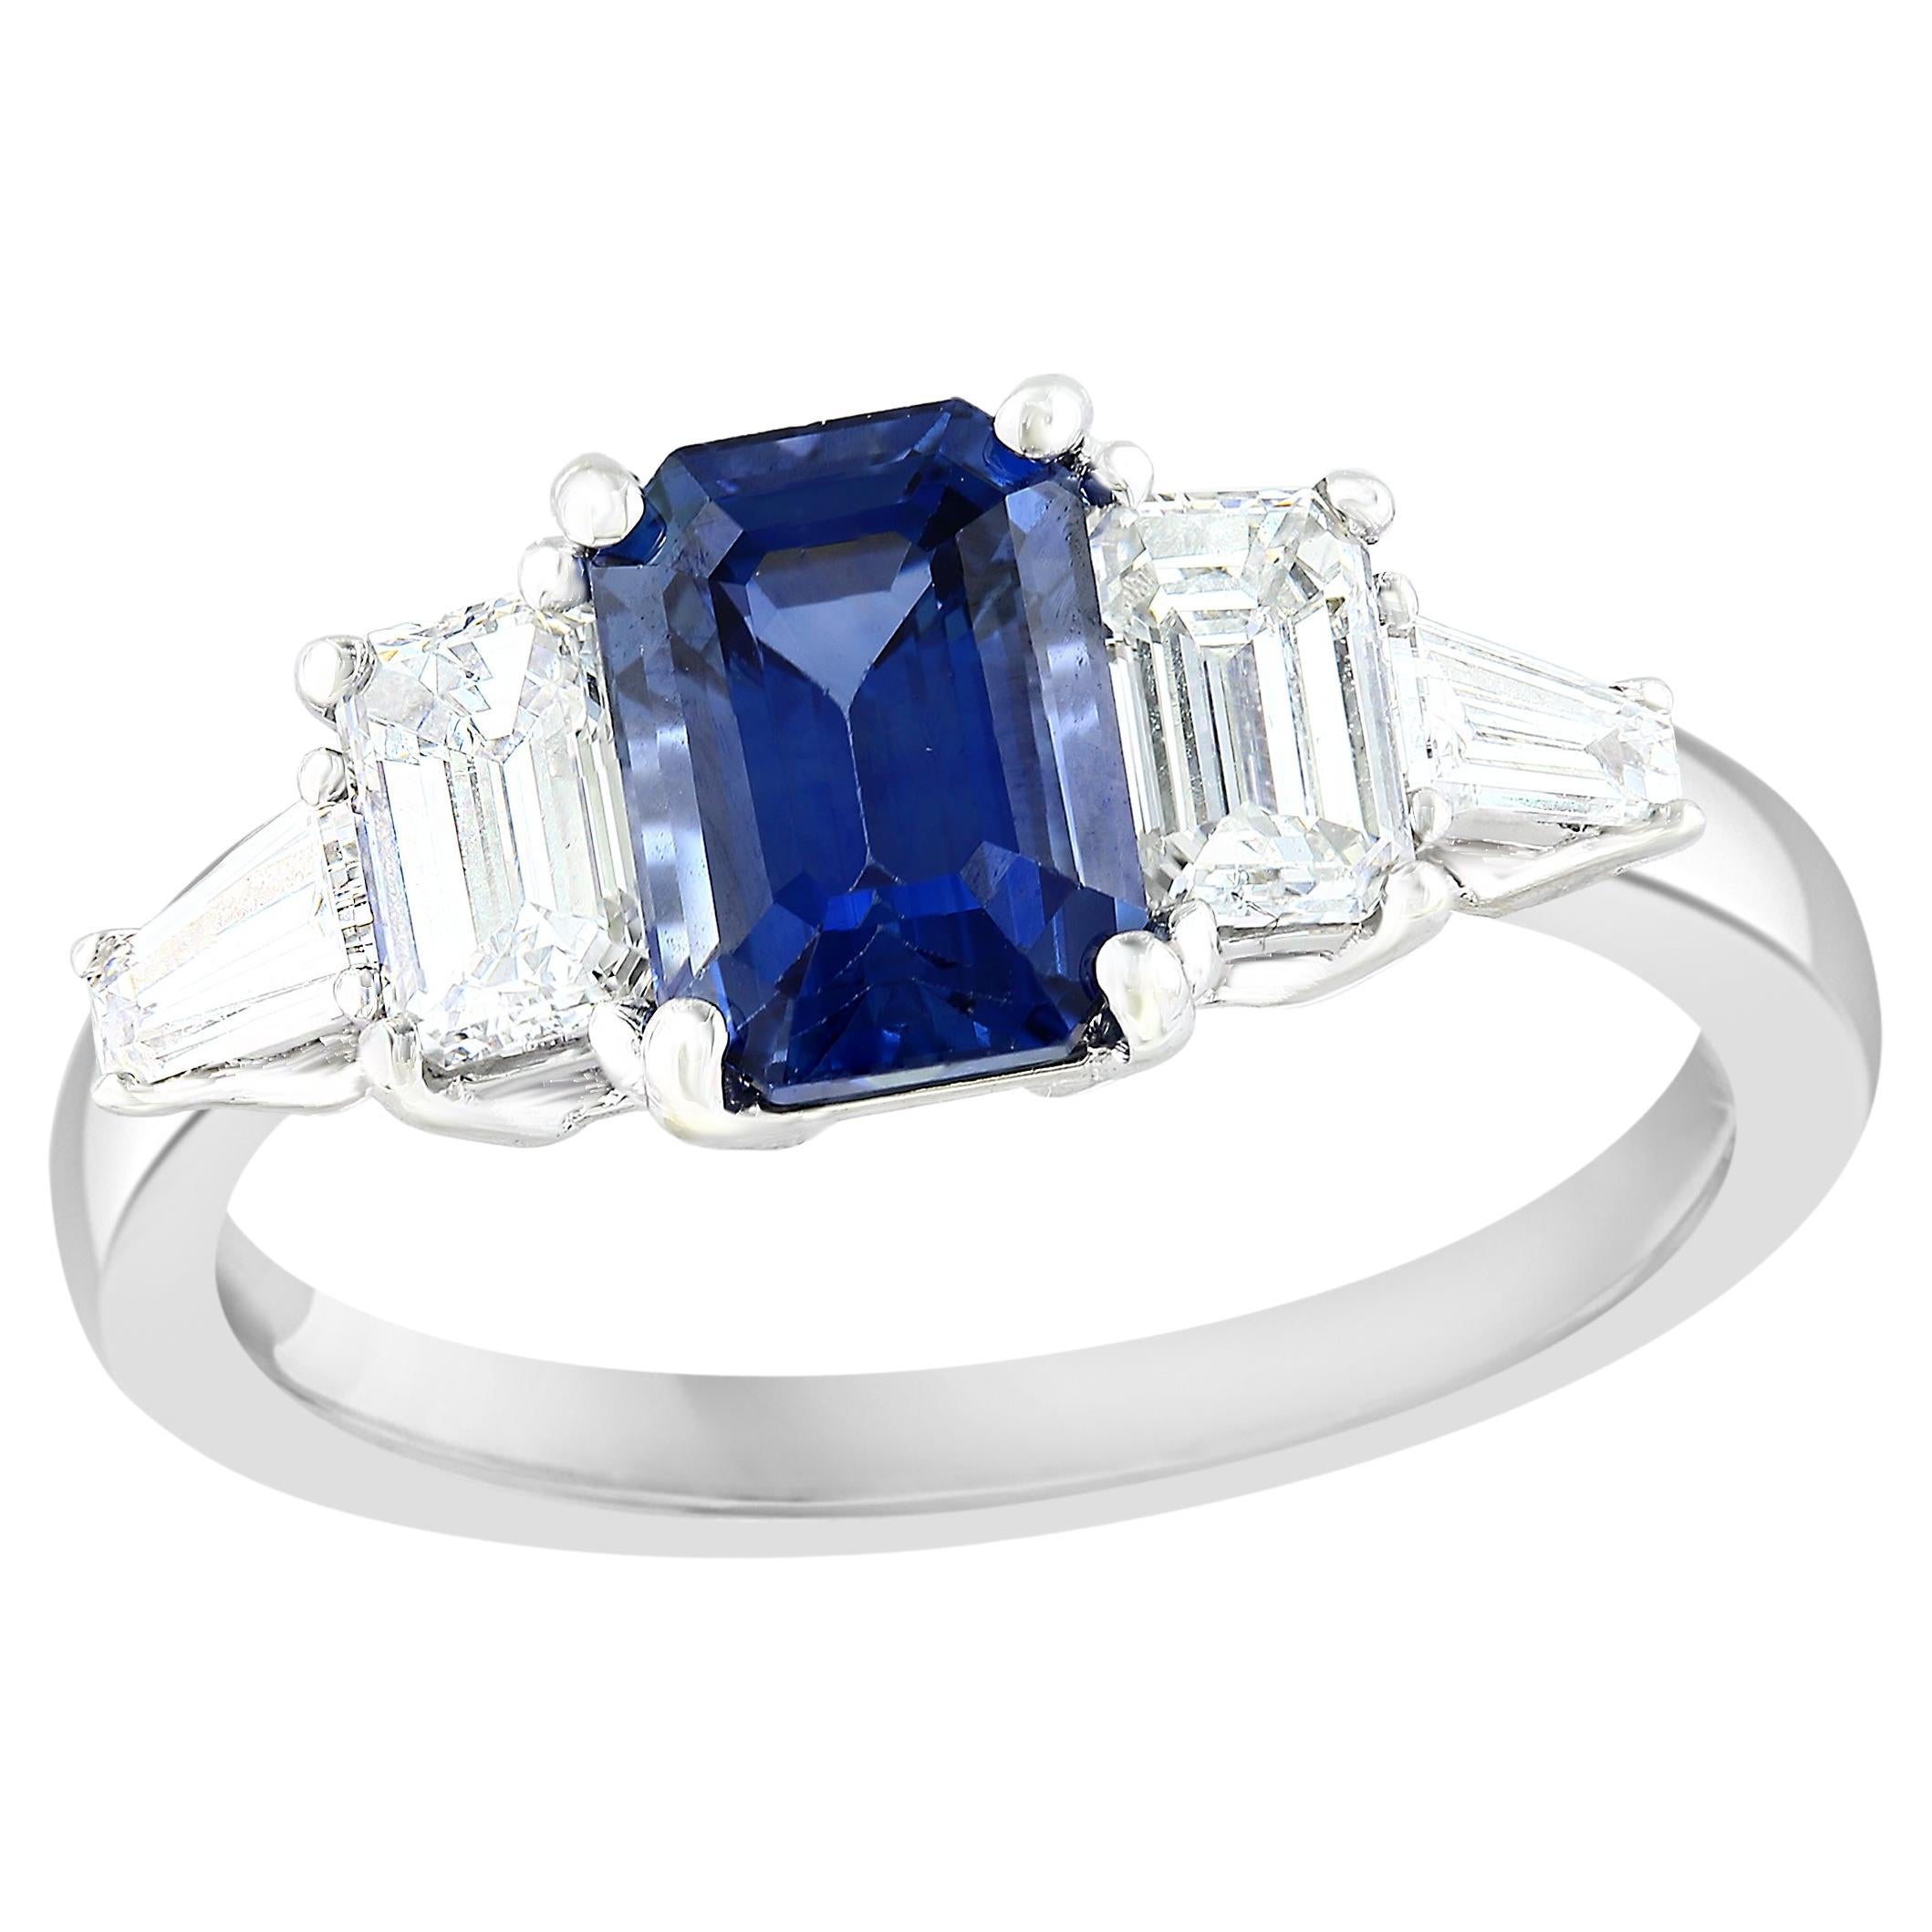 1.12 Carat Emerald Cut Sapphire and Diamond 5 Stone Ring in 14k White Gold